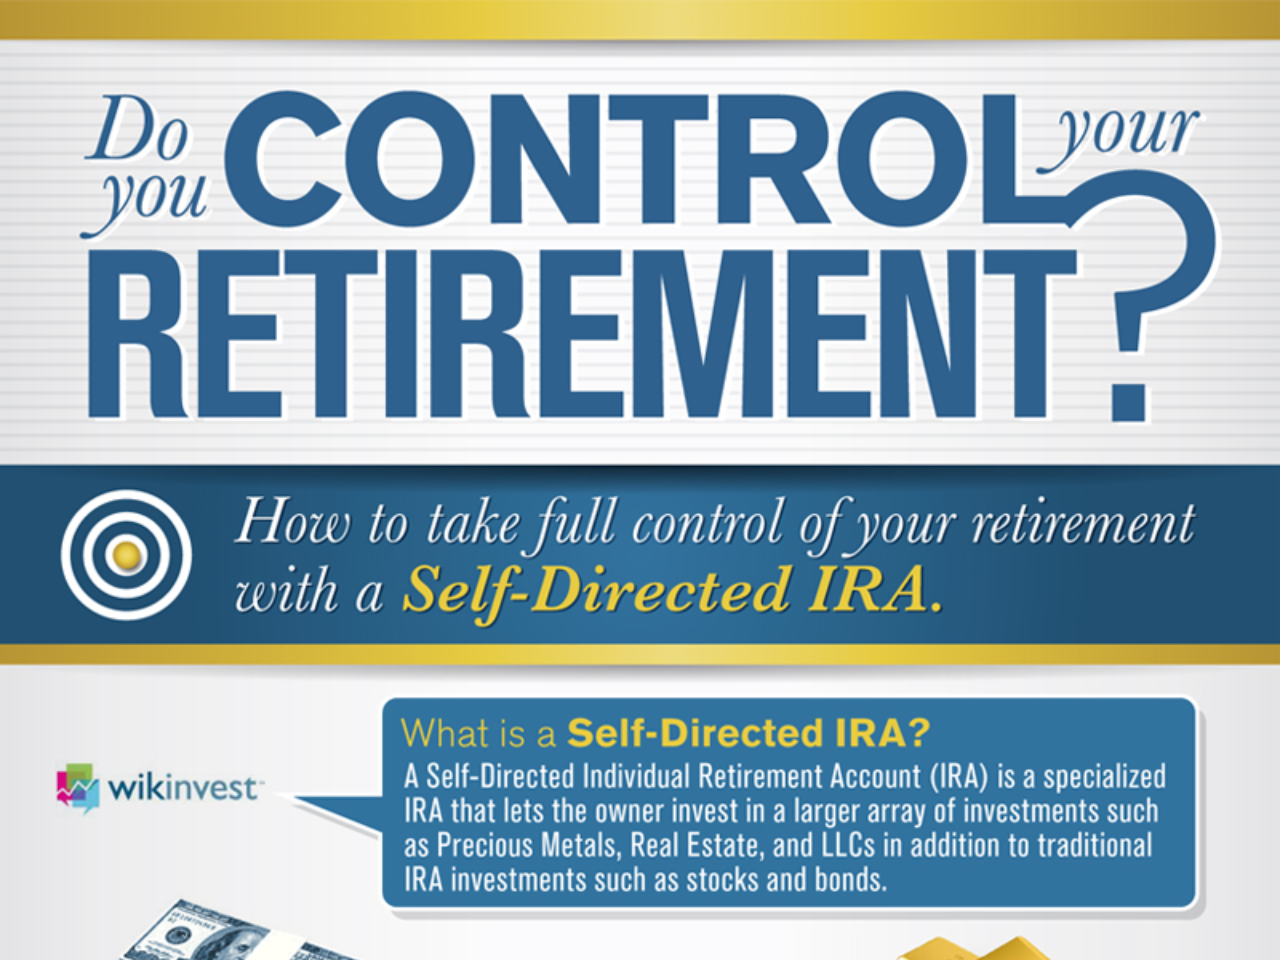 Self-Directed IRA To Control Your Retirement [InfoGraphic]